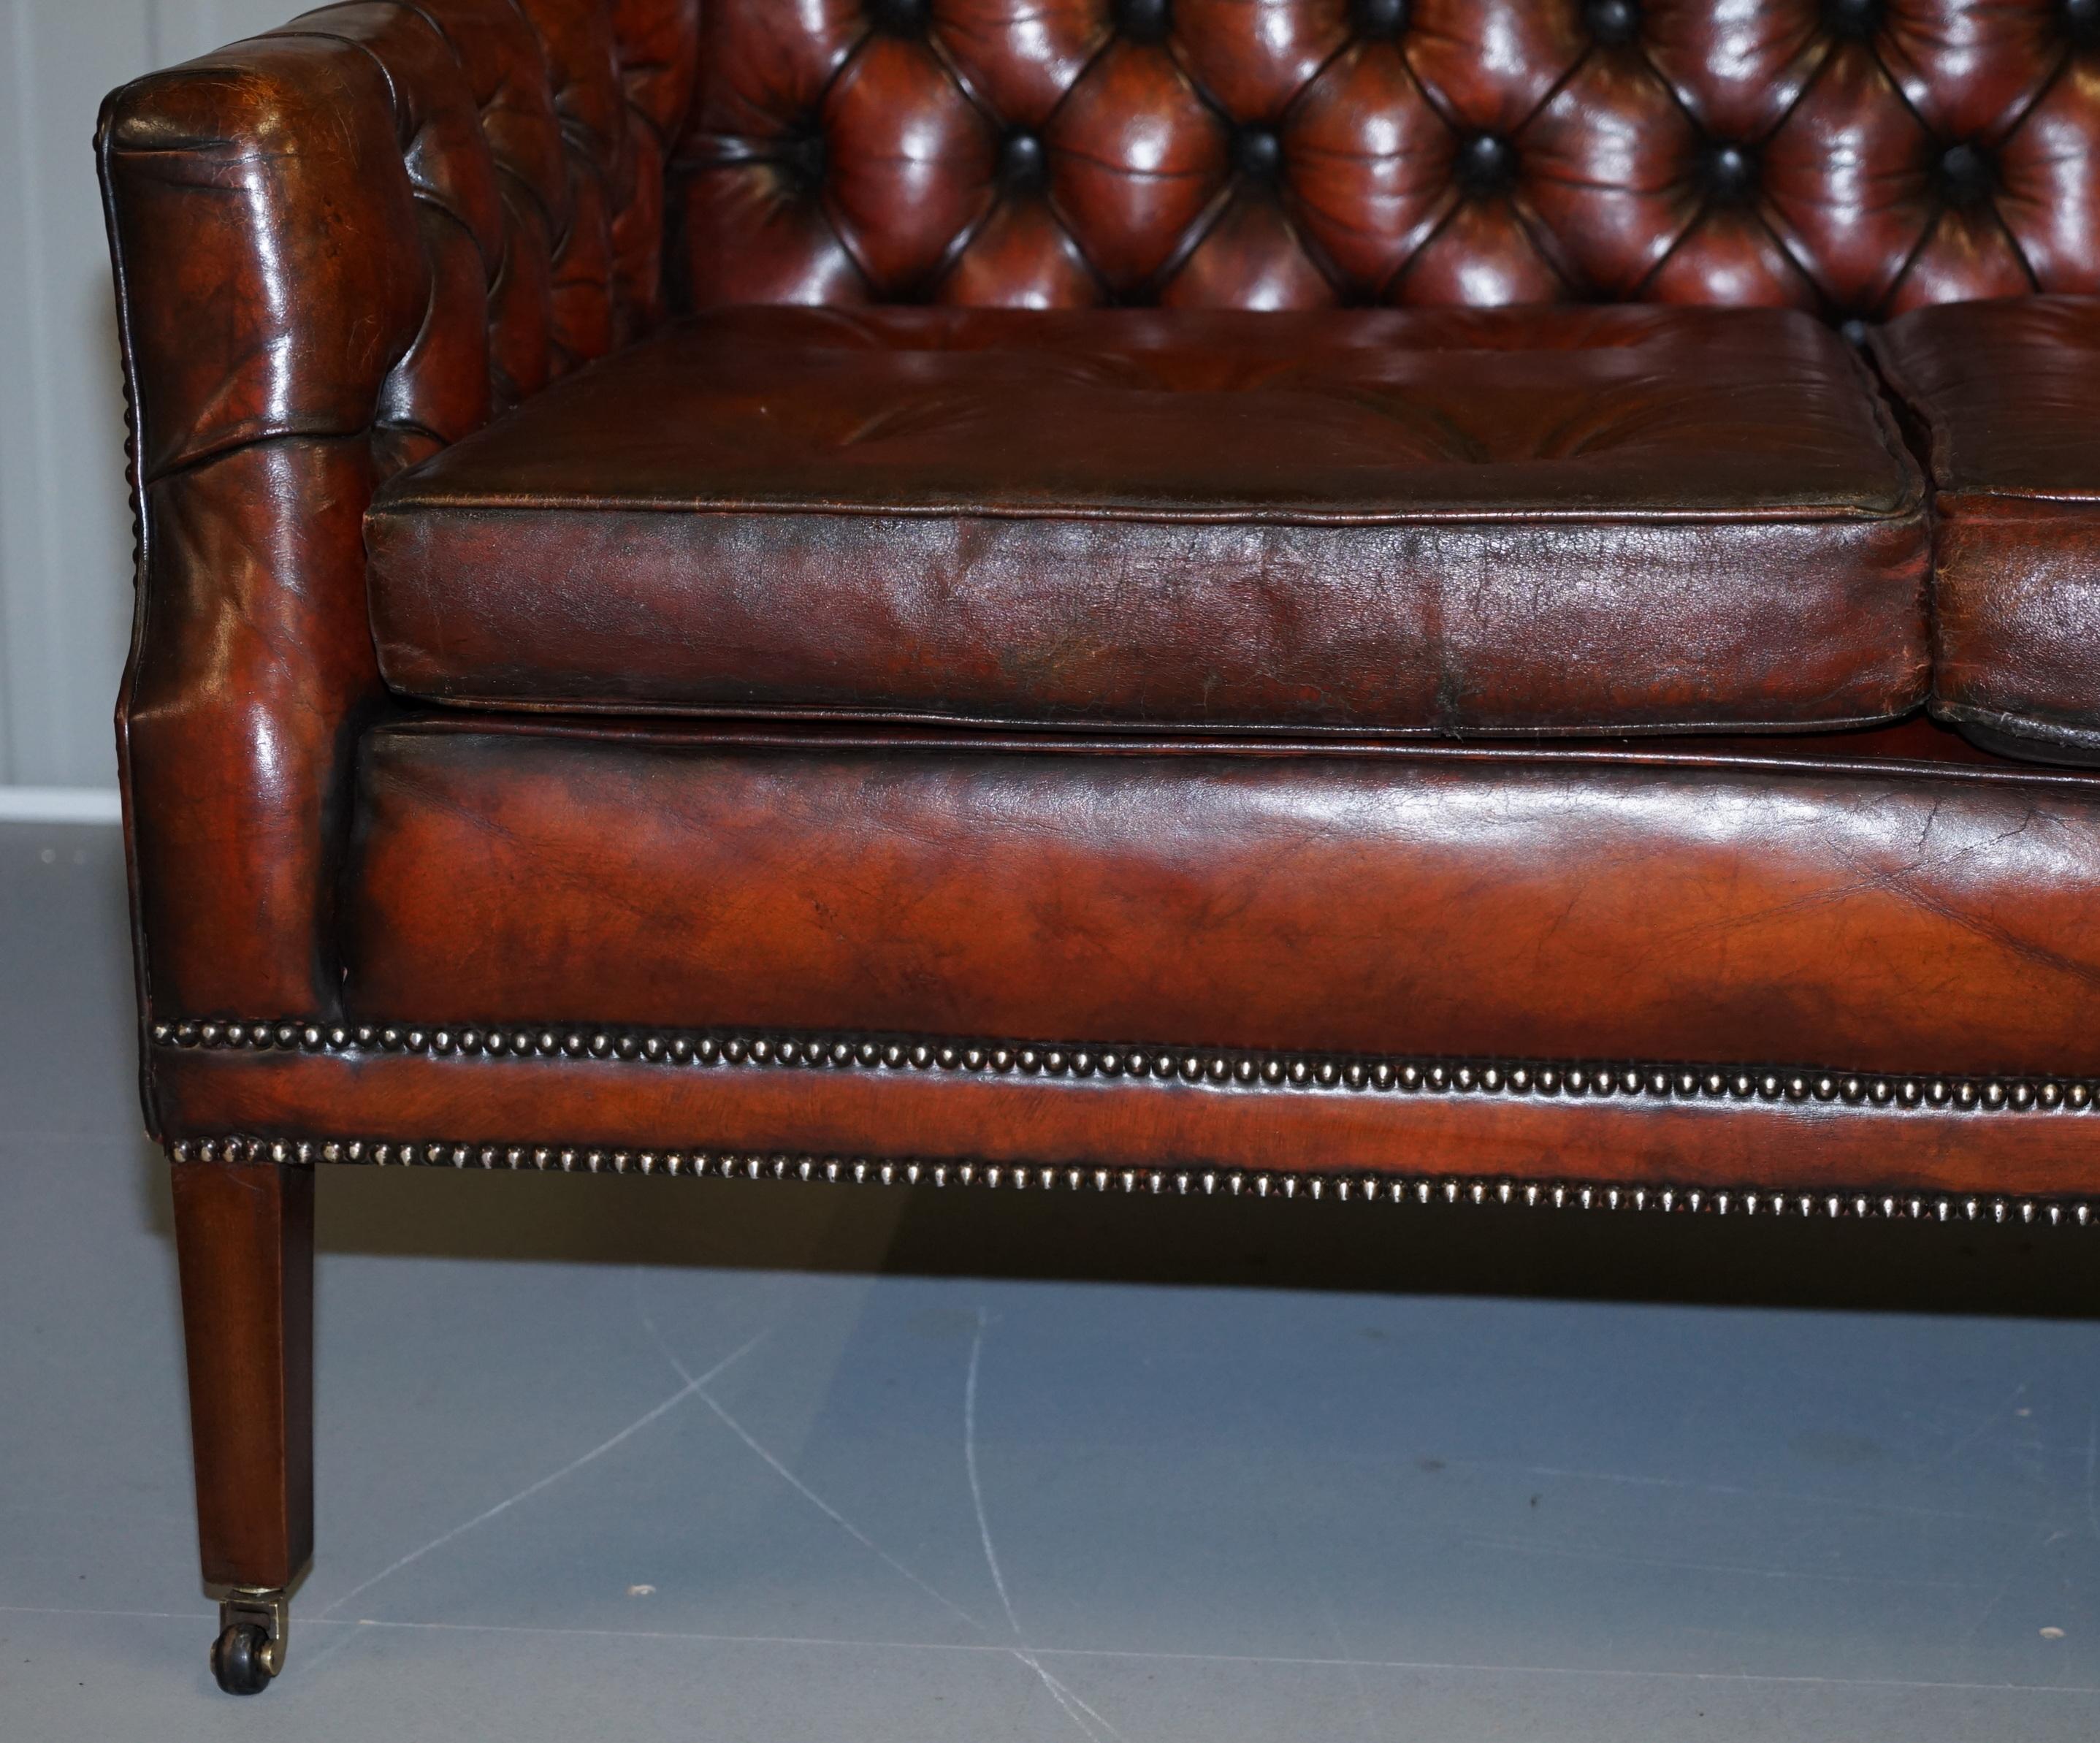 Fully Restored Whisky Brown Leather Lutyen's Viceroy Sofa, circa 1900  For Sale 2